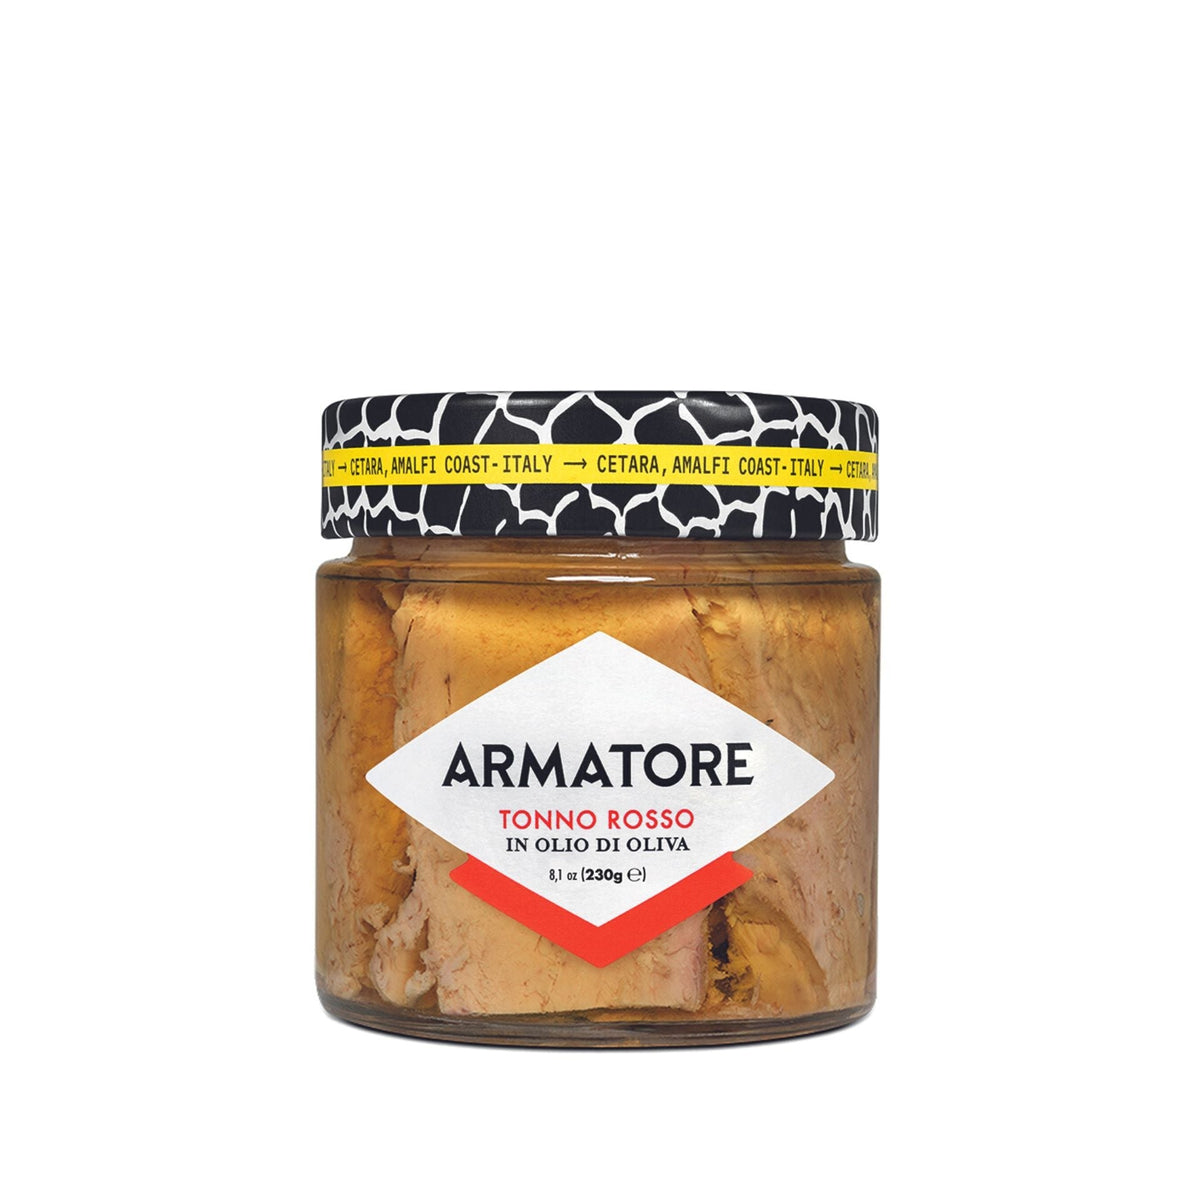 Armatore Bluefin Tuna Fillets in Olive Oil 230g  | Imported and distributed in the UK by Just Gourmet Foods